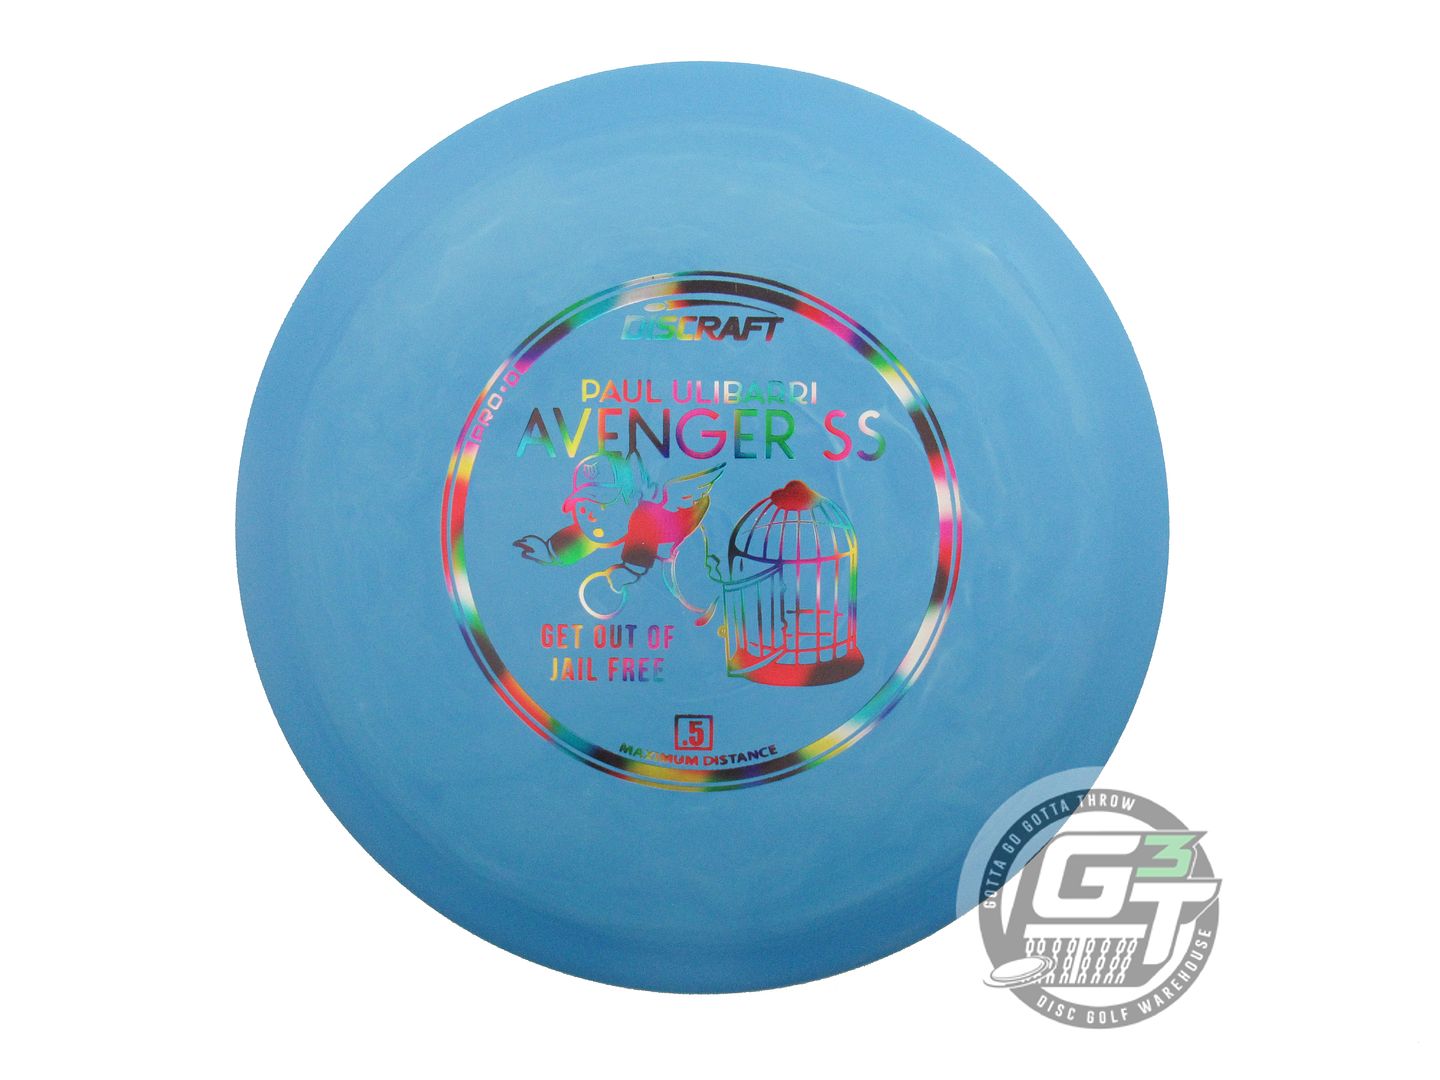 Discraft Limited Edition 2024 Elite Team Paul Ulibarri Pro D Avenger SS Distance Driver Golf Disc (Individually Listed)